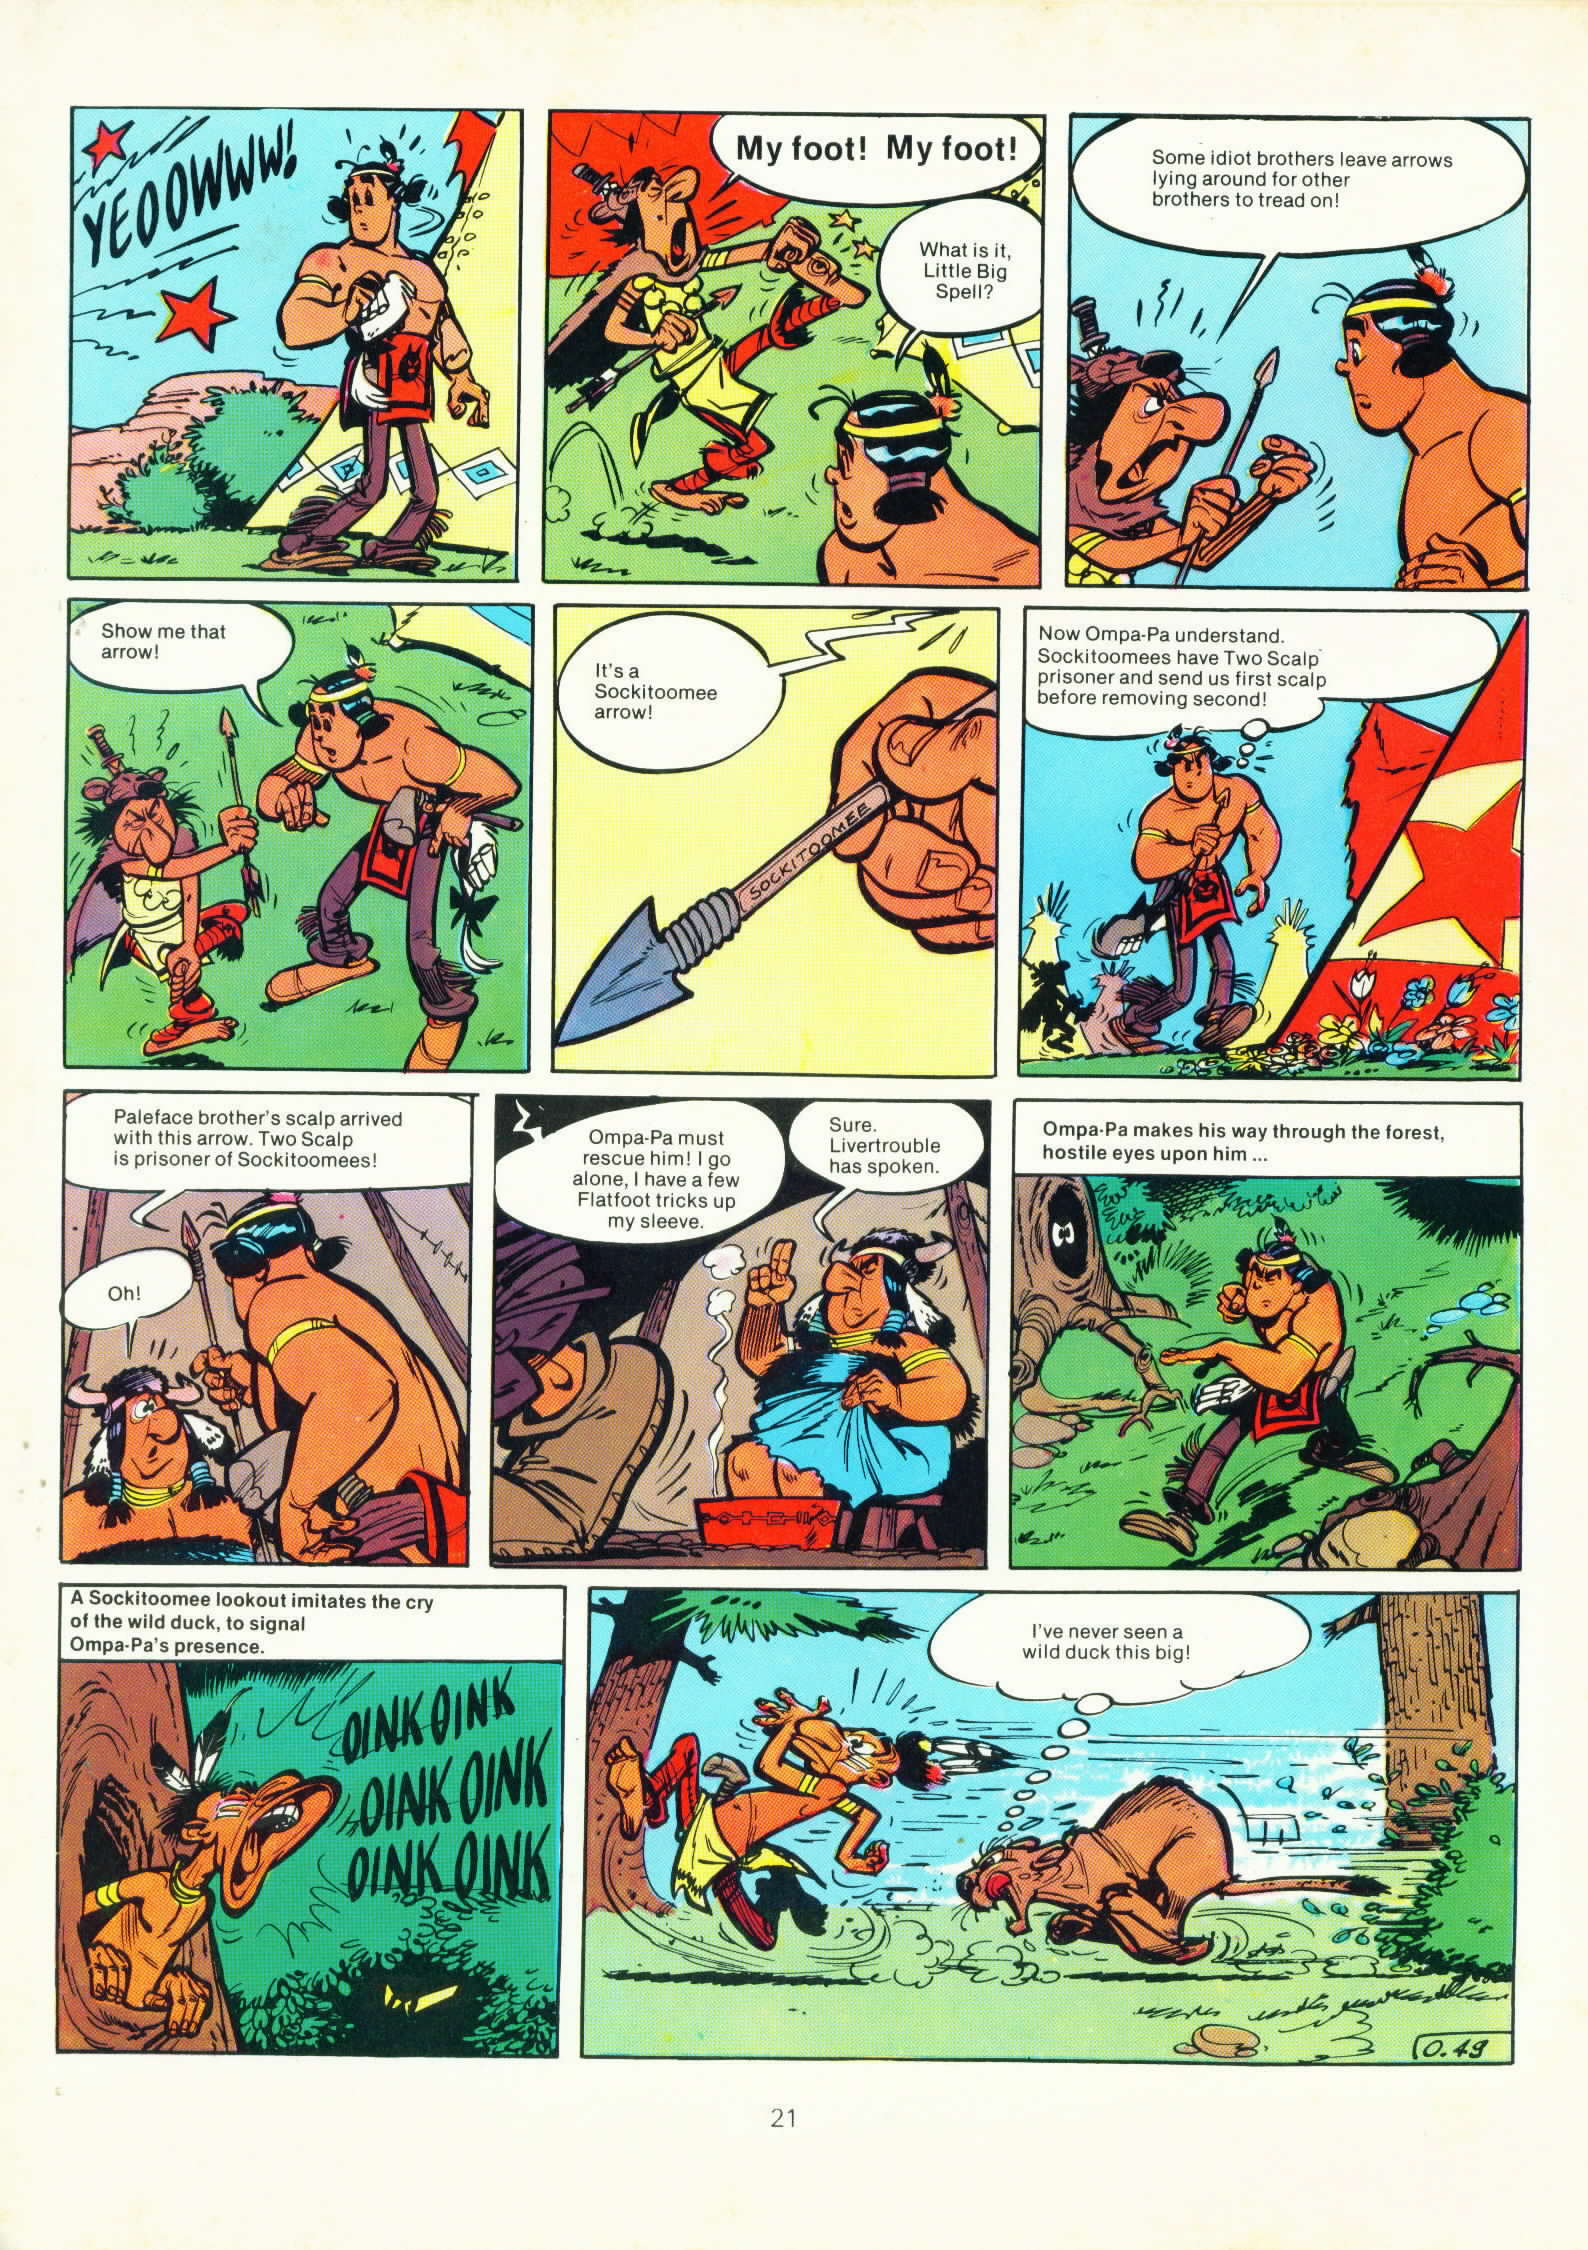 Read online Ompa-pa the Redskin comic -  Issue #2 - 22